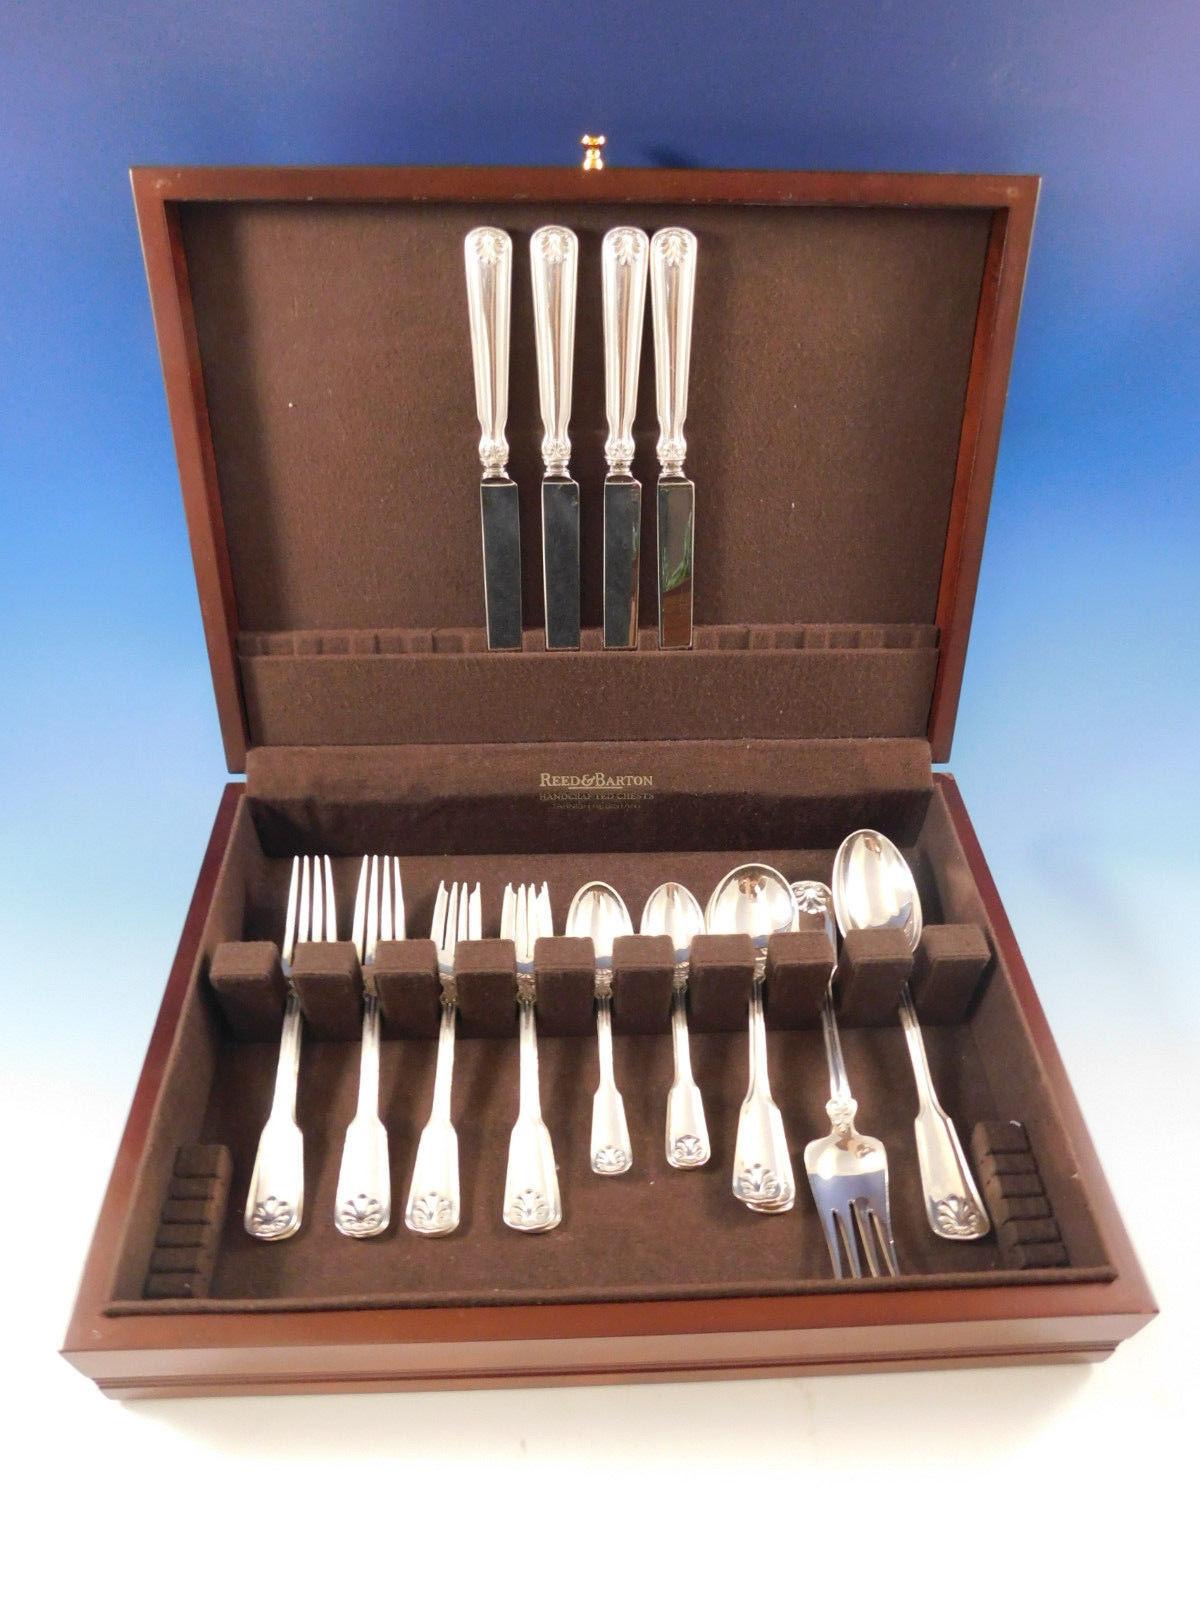 Dinner size shell and thread by Tiffany & Co. sterling silver flatware set - 22 pieces. Great starter set! This set includes:

4 dinner size knives, 10 1/4